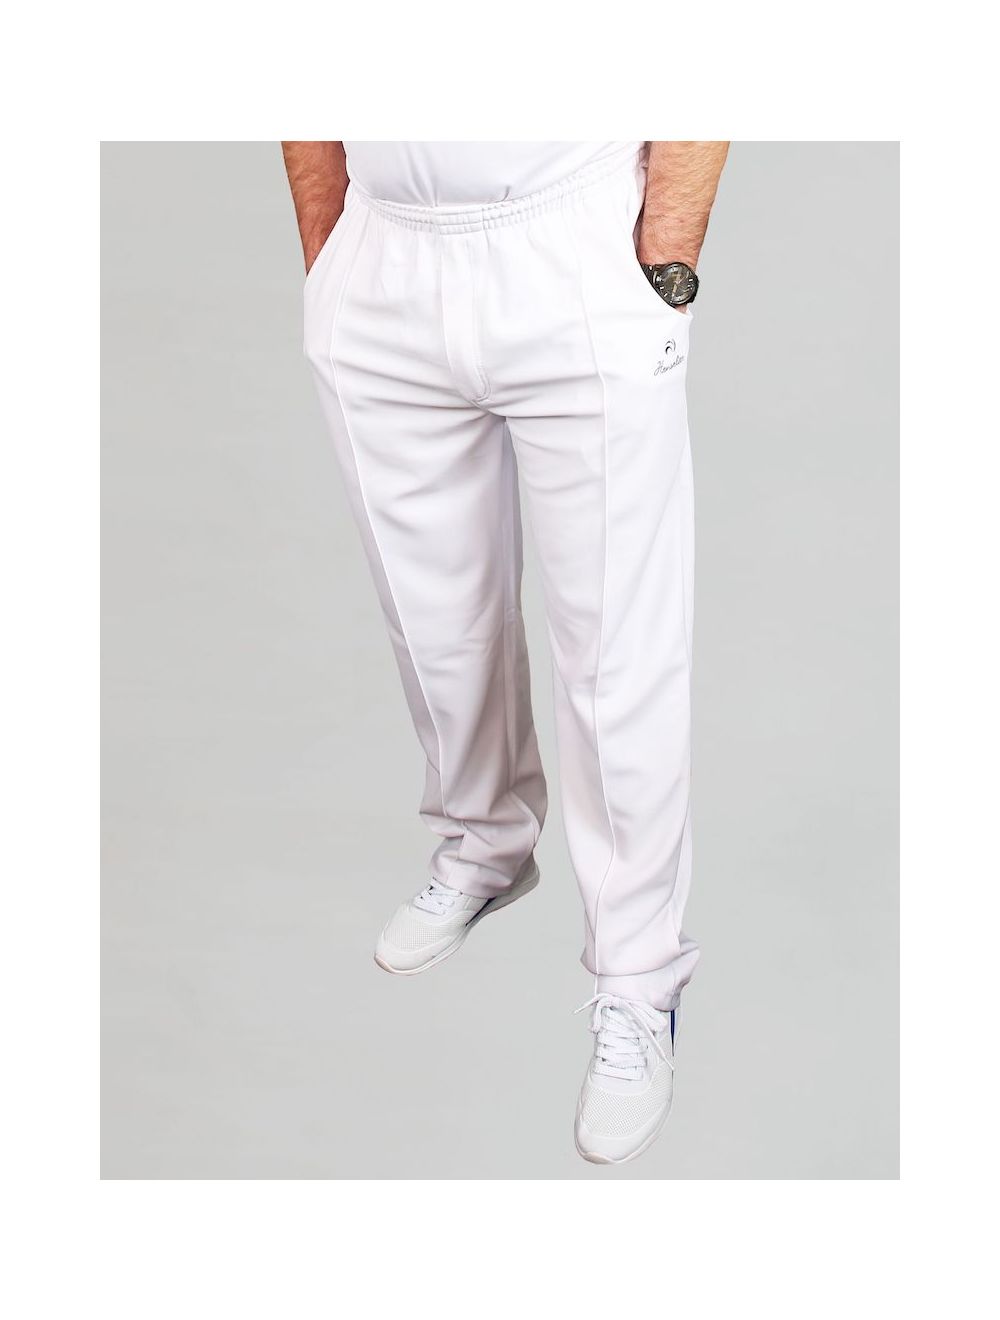 RPM store Sports Cricket TShirt and Trousers Combo Uniform Dress for Men  White Size 42  Amazonin Clothing  Accessories